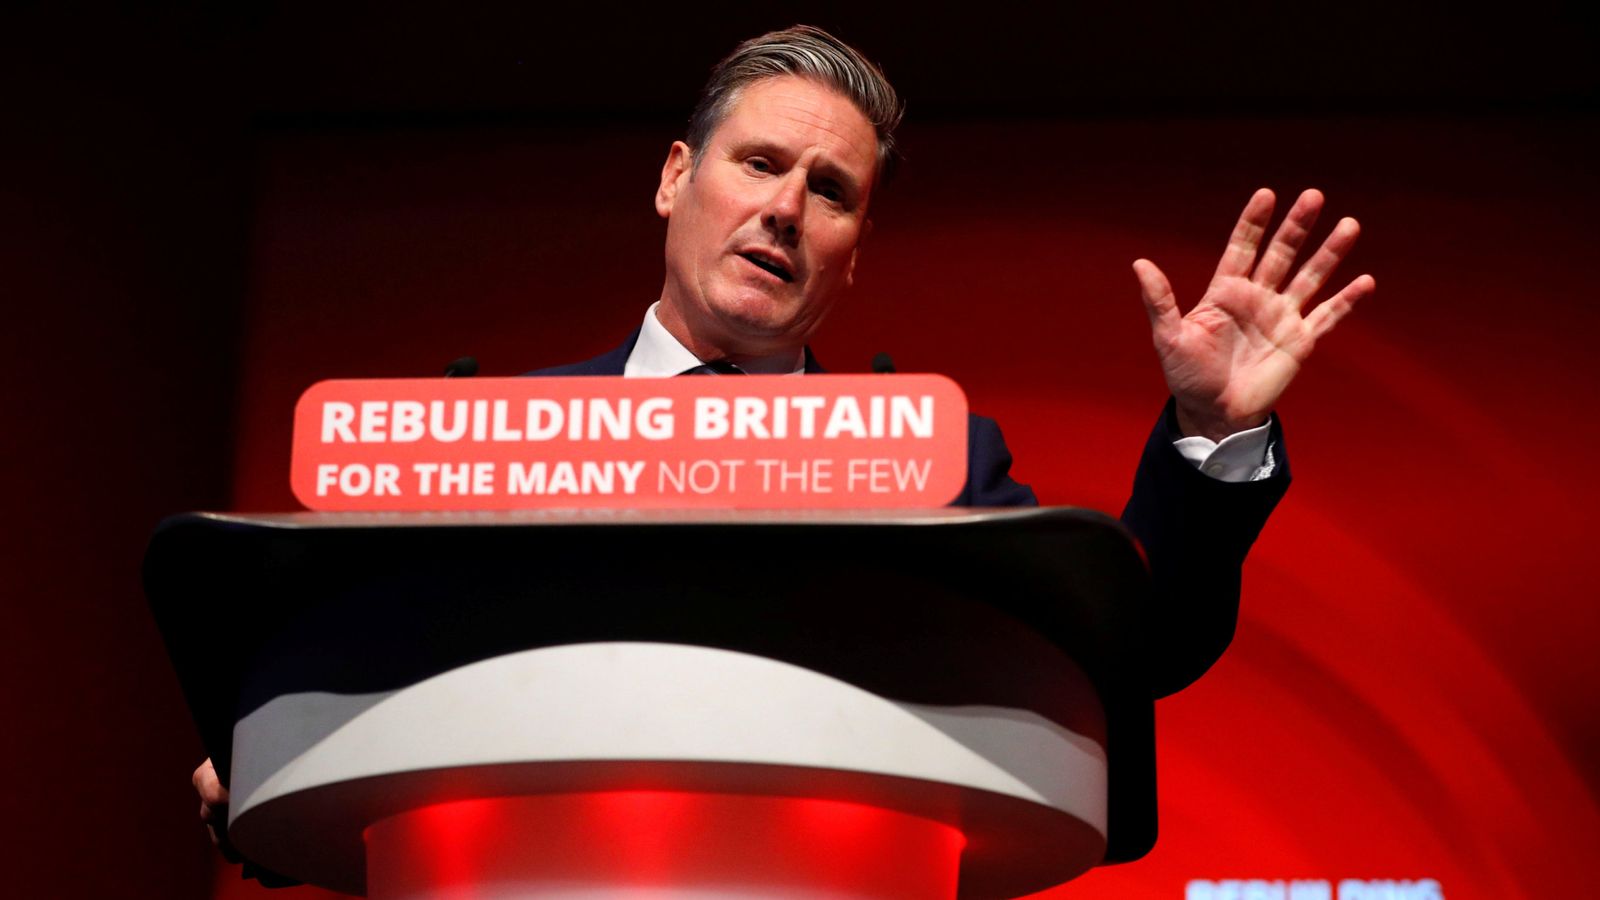 Labour will vote down 'blind' Brexit deal, Sir Keir Starmer warns PM ...